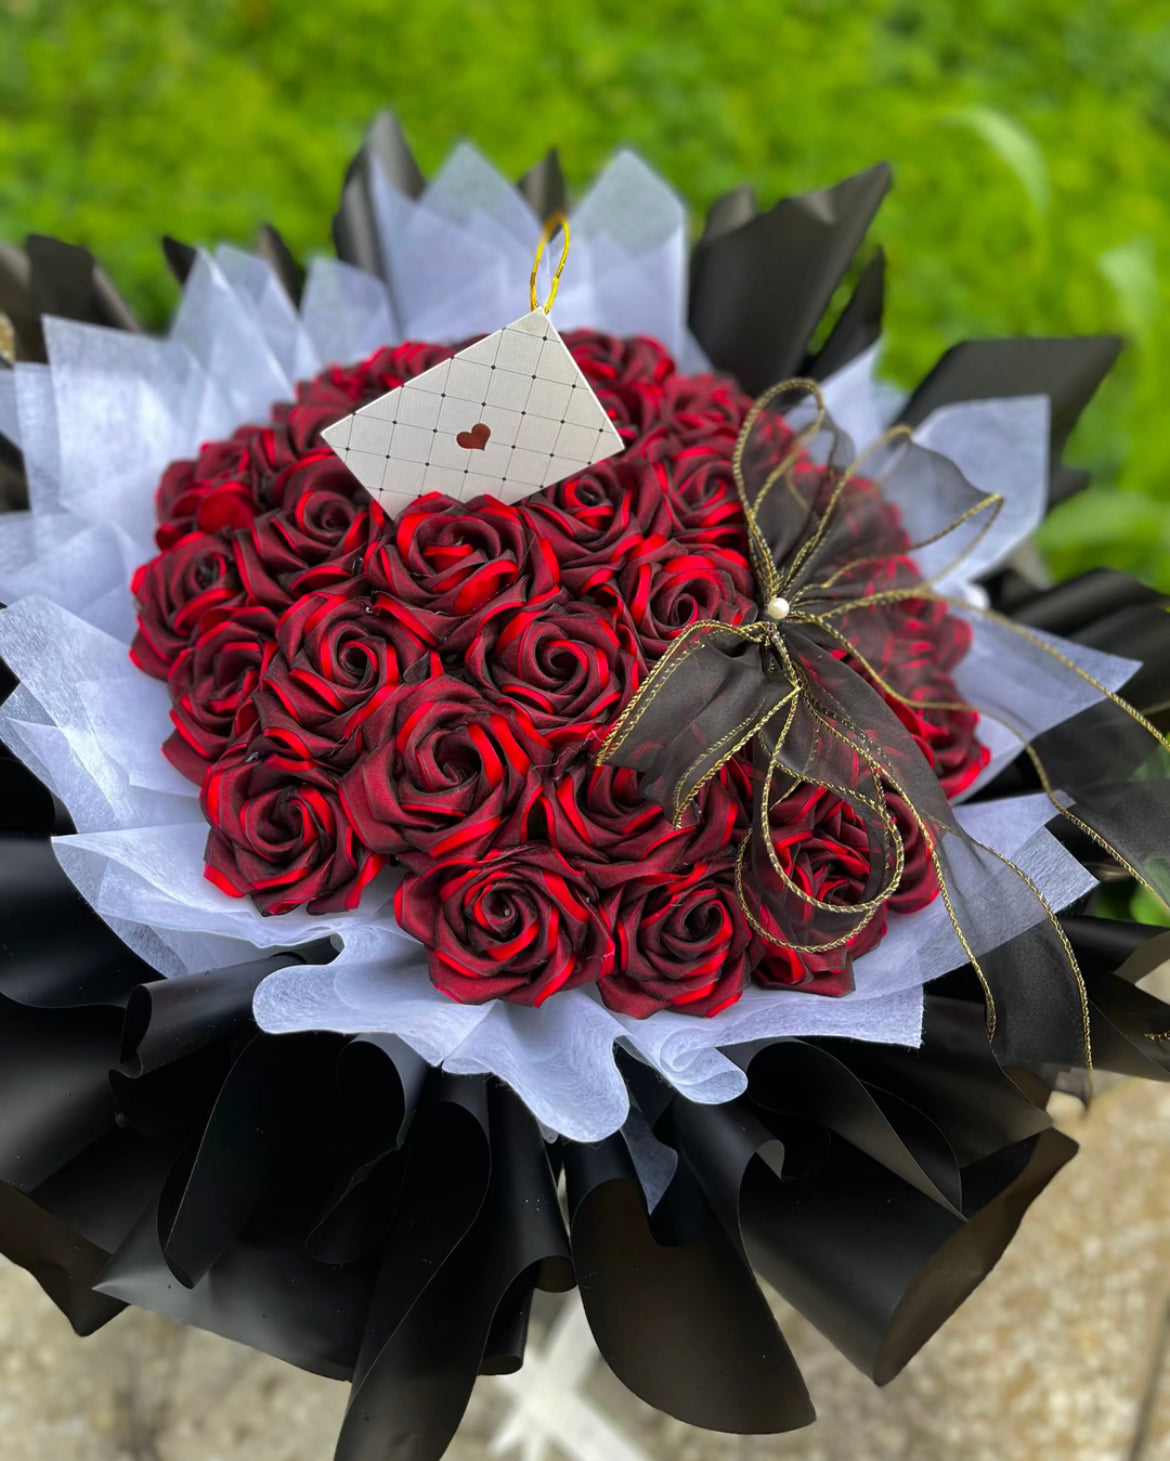 Creative Card Messages | About Flowers